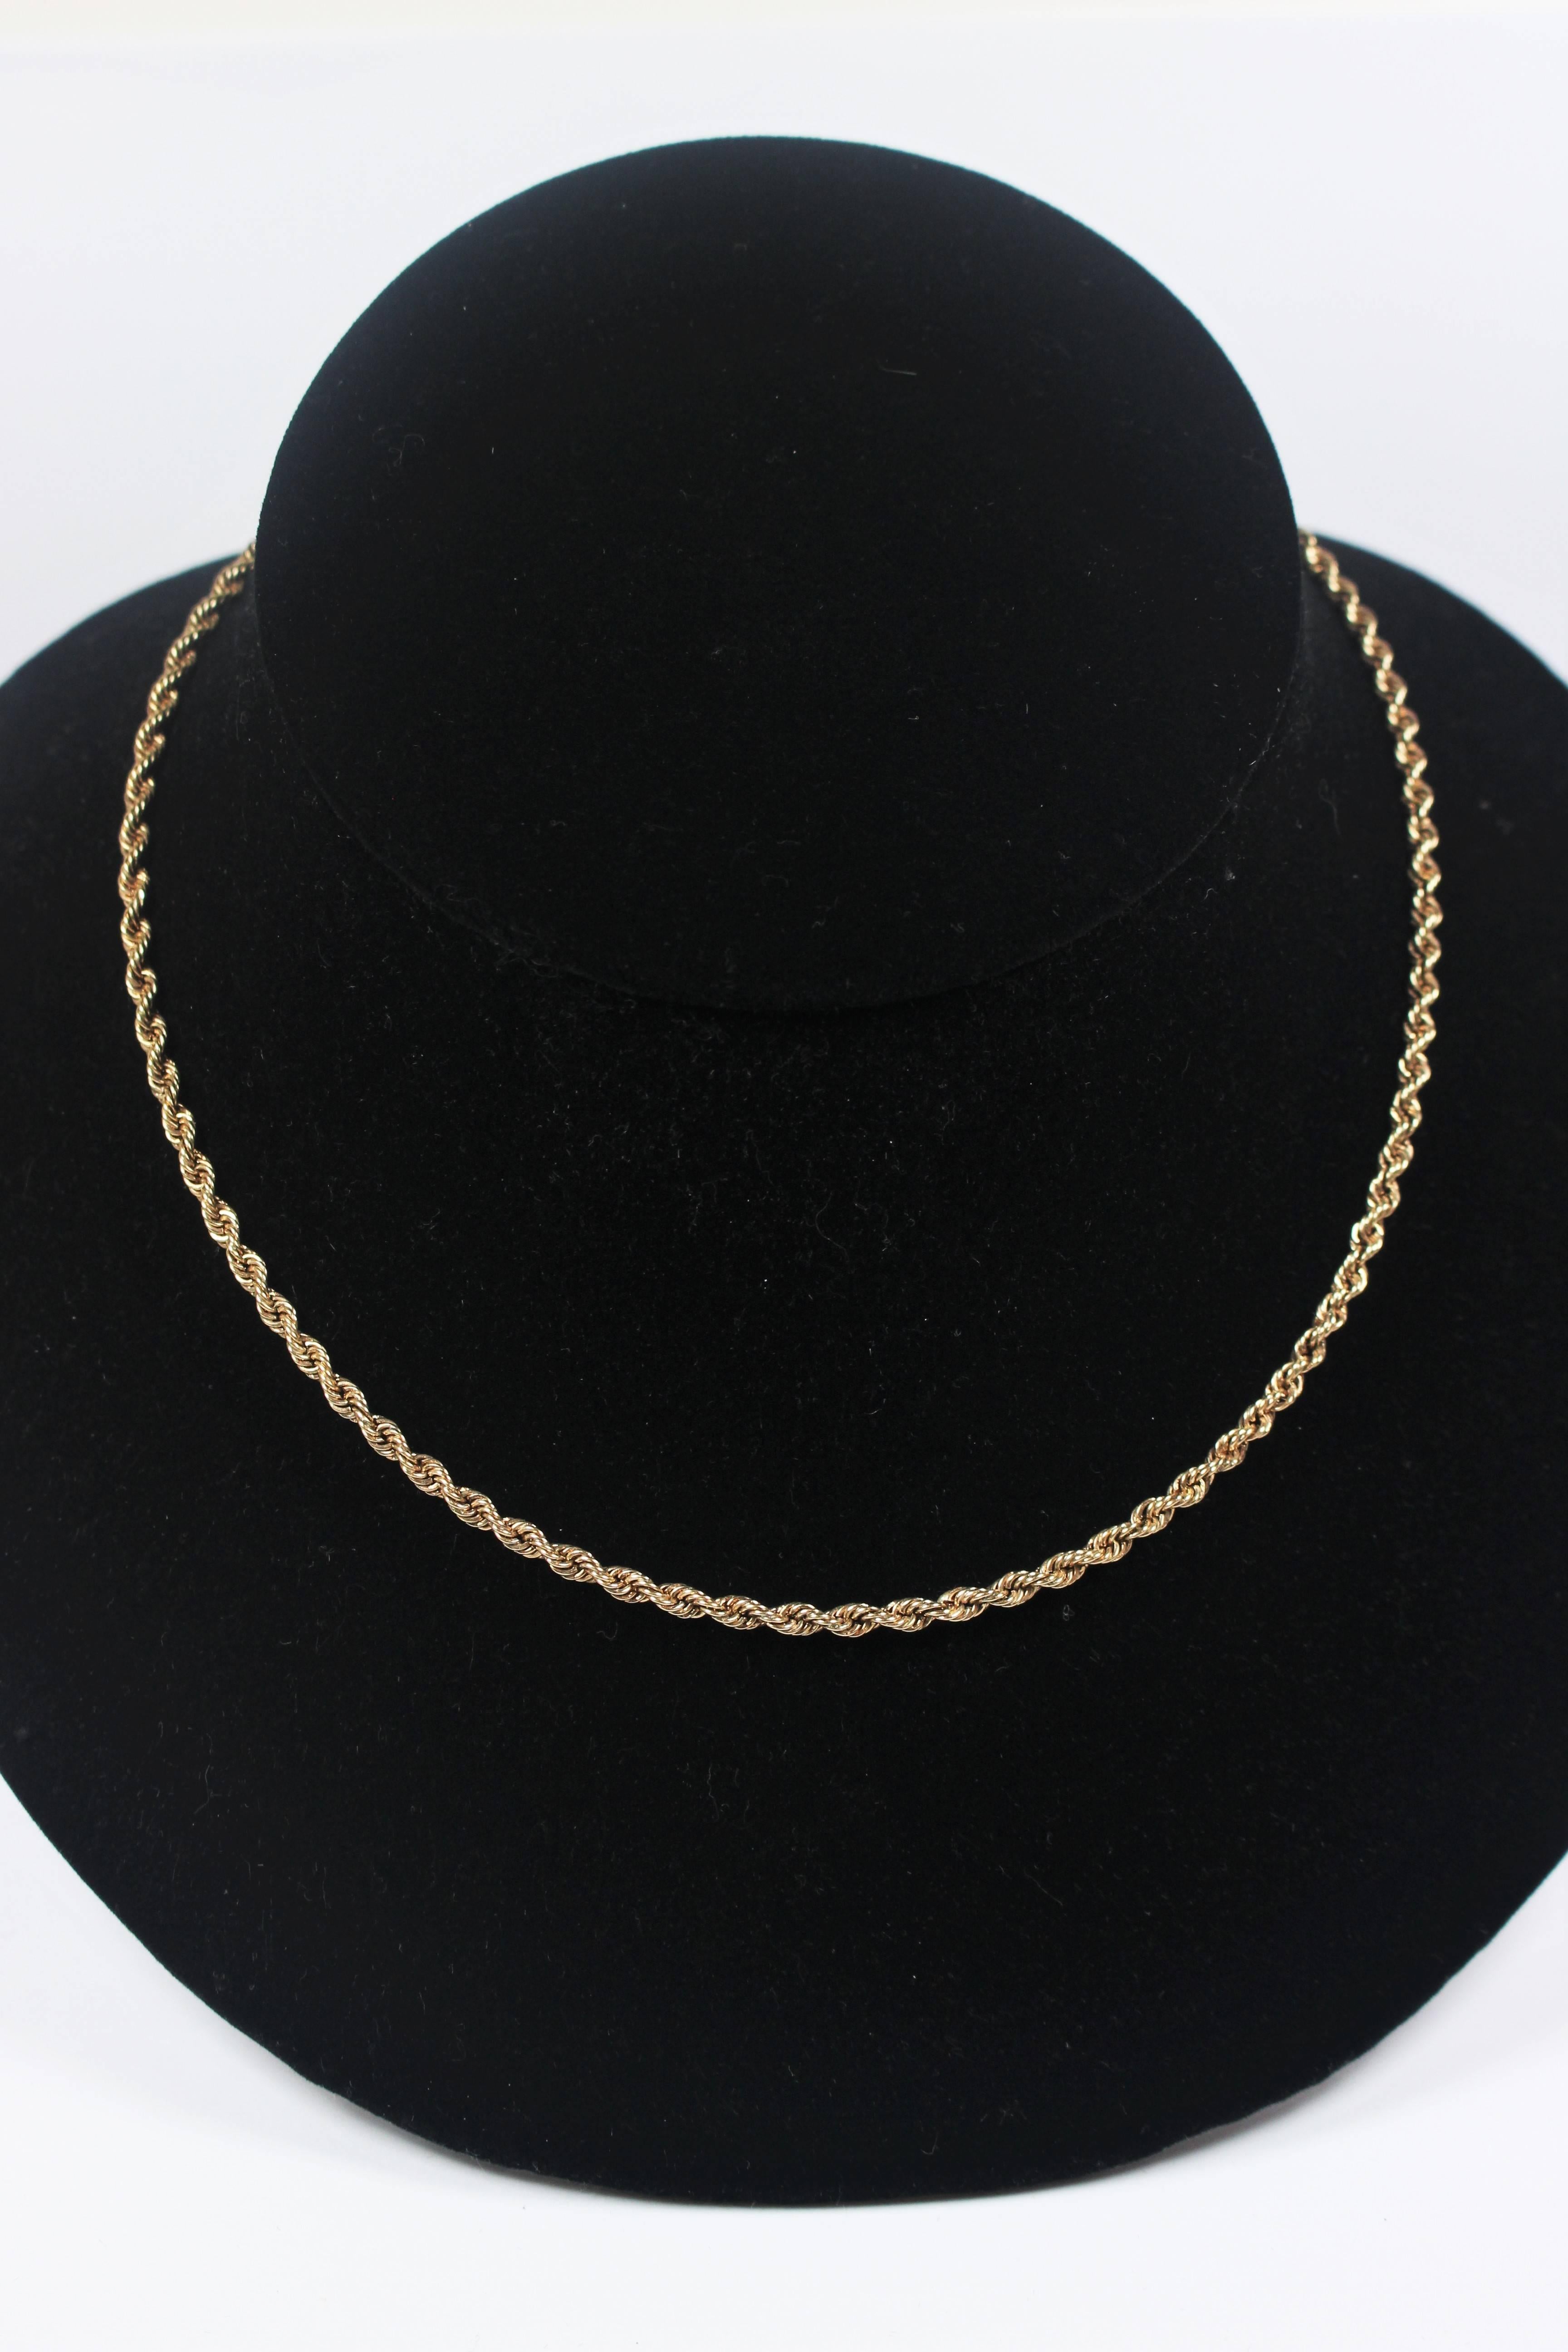 This necklace is composed of 14KT yellow gold. Features a rope design with clasp closure. In excellent vintage condition.

Specs: 
14KT Yellow Gold
Length: 20